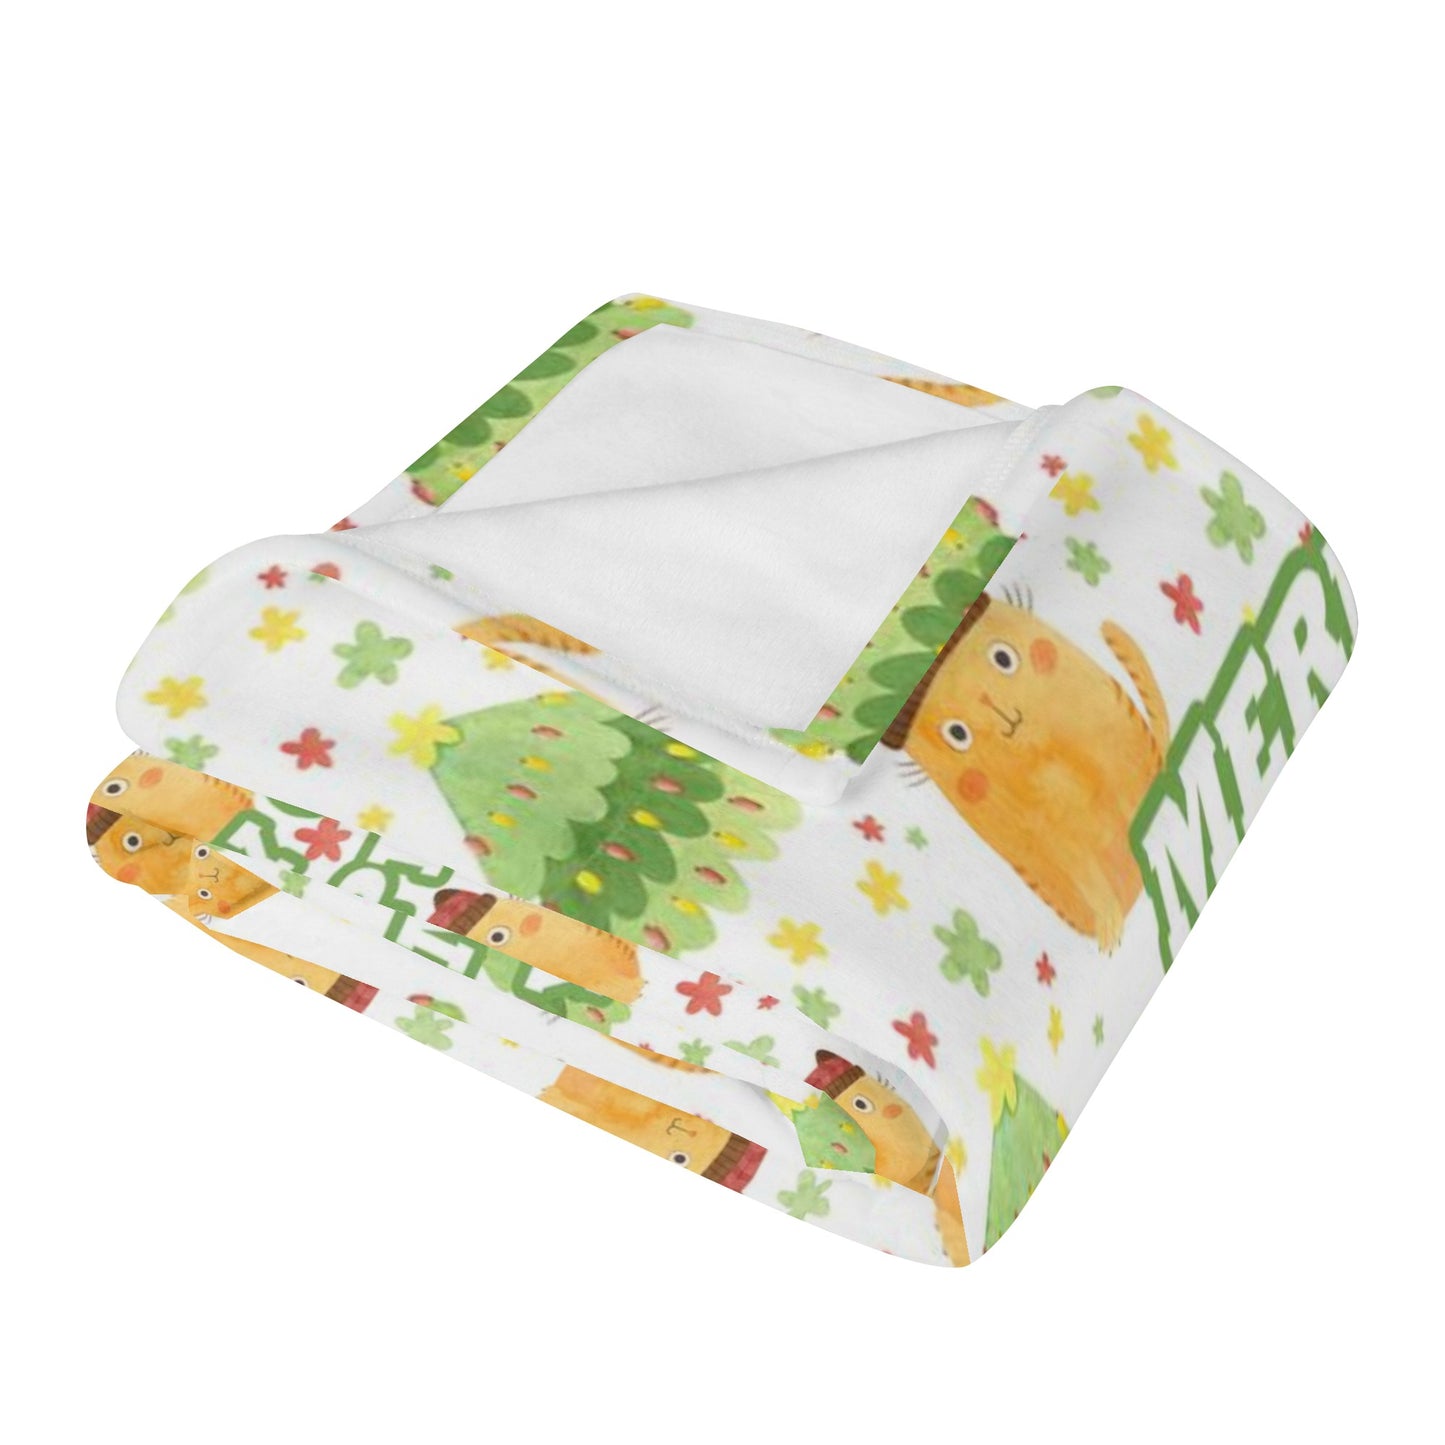 A Kitty Cat Christmas Soft Flannel Breathable Blanket for Babies and Tots